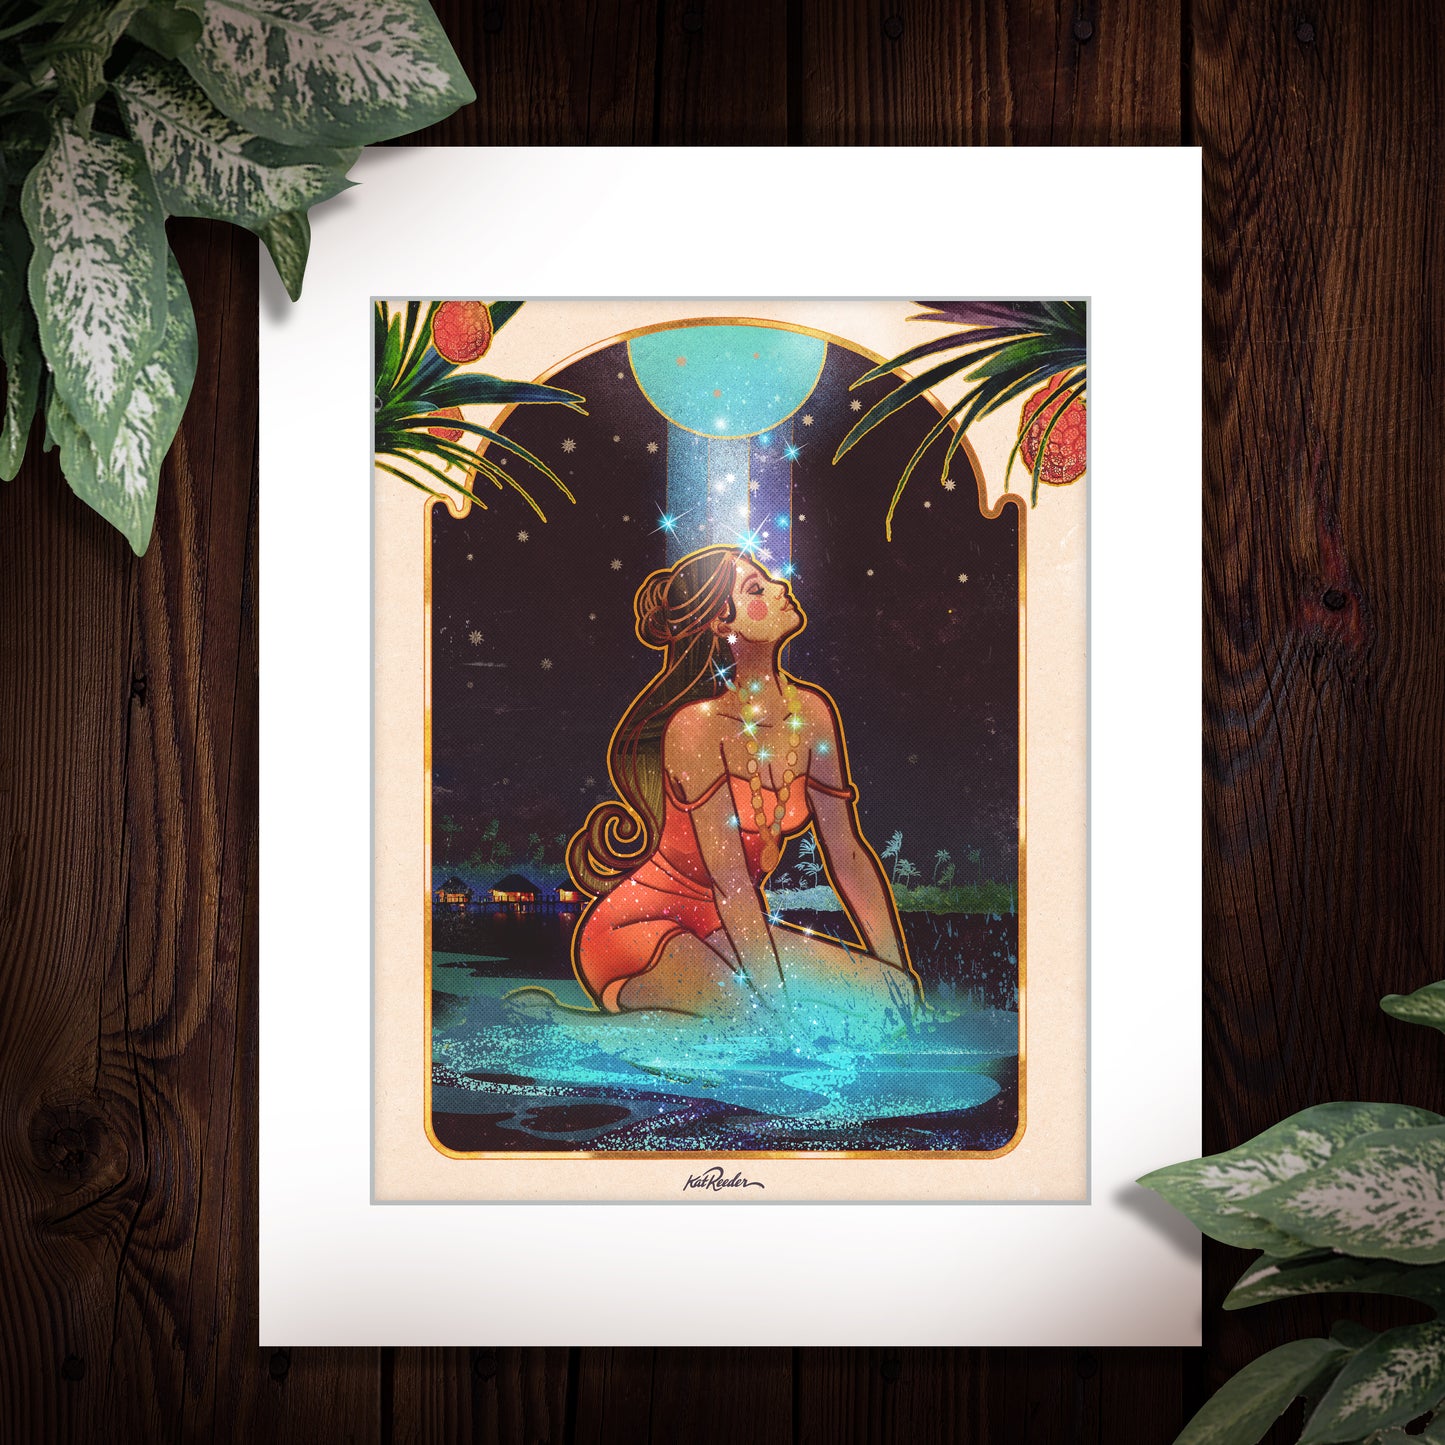 11x14 matted print of an illustrated travel poster for the Maldives featuring a girl on the beach shore at night looking up at the bright blue moon